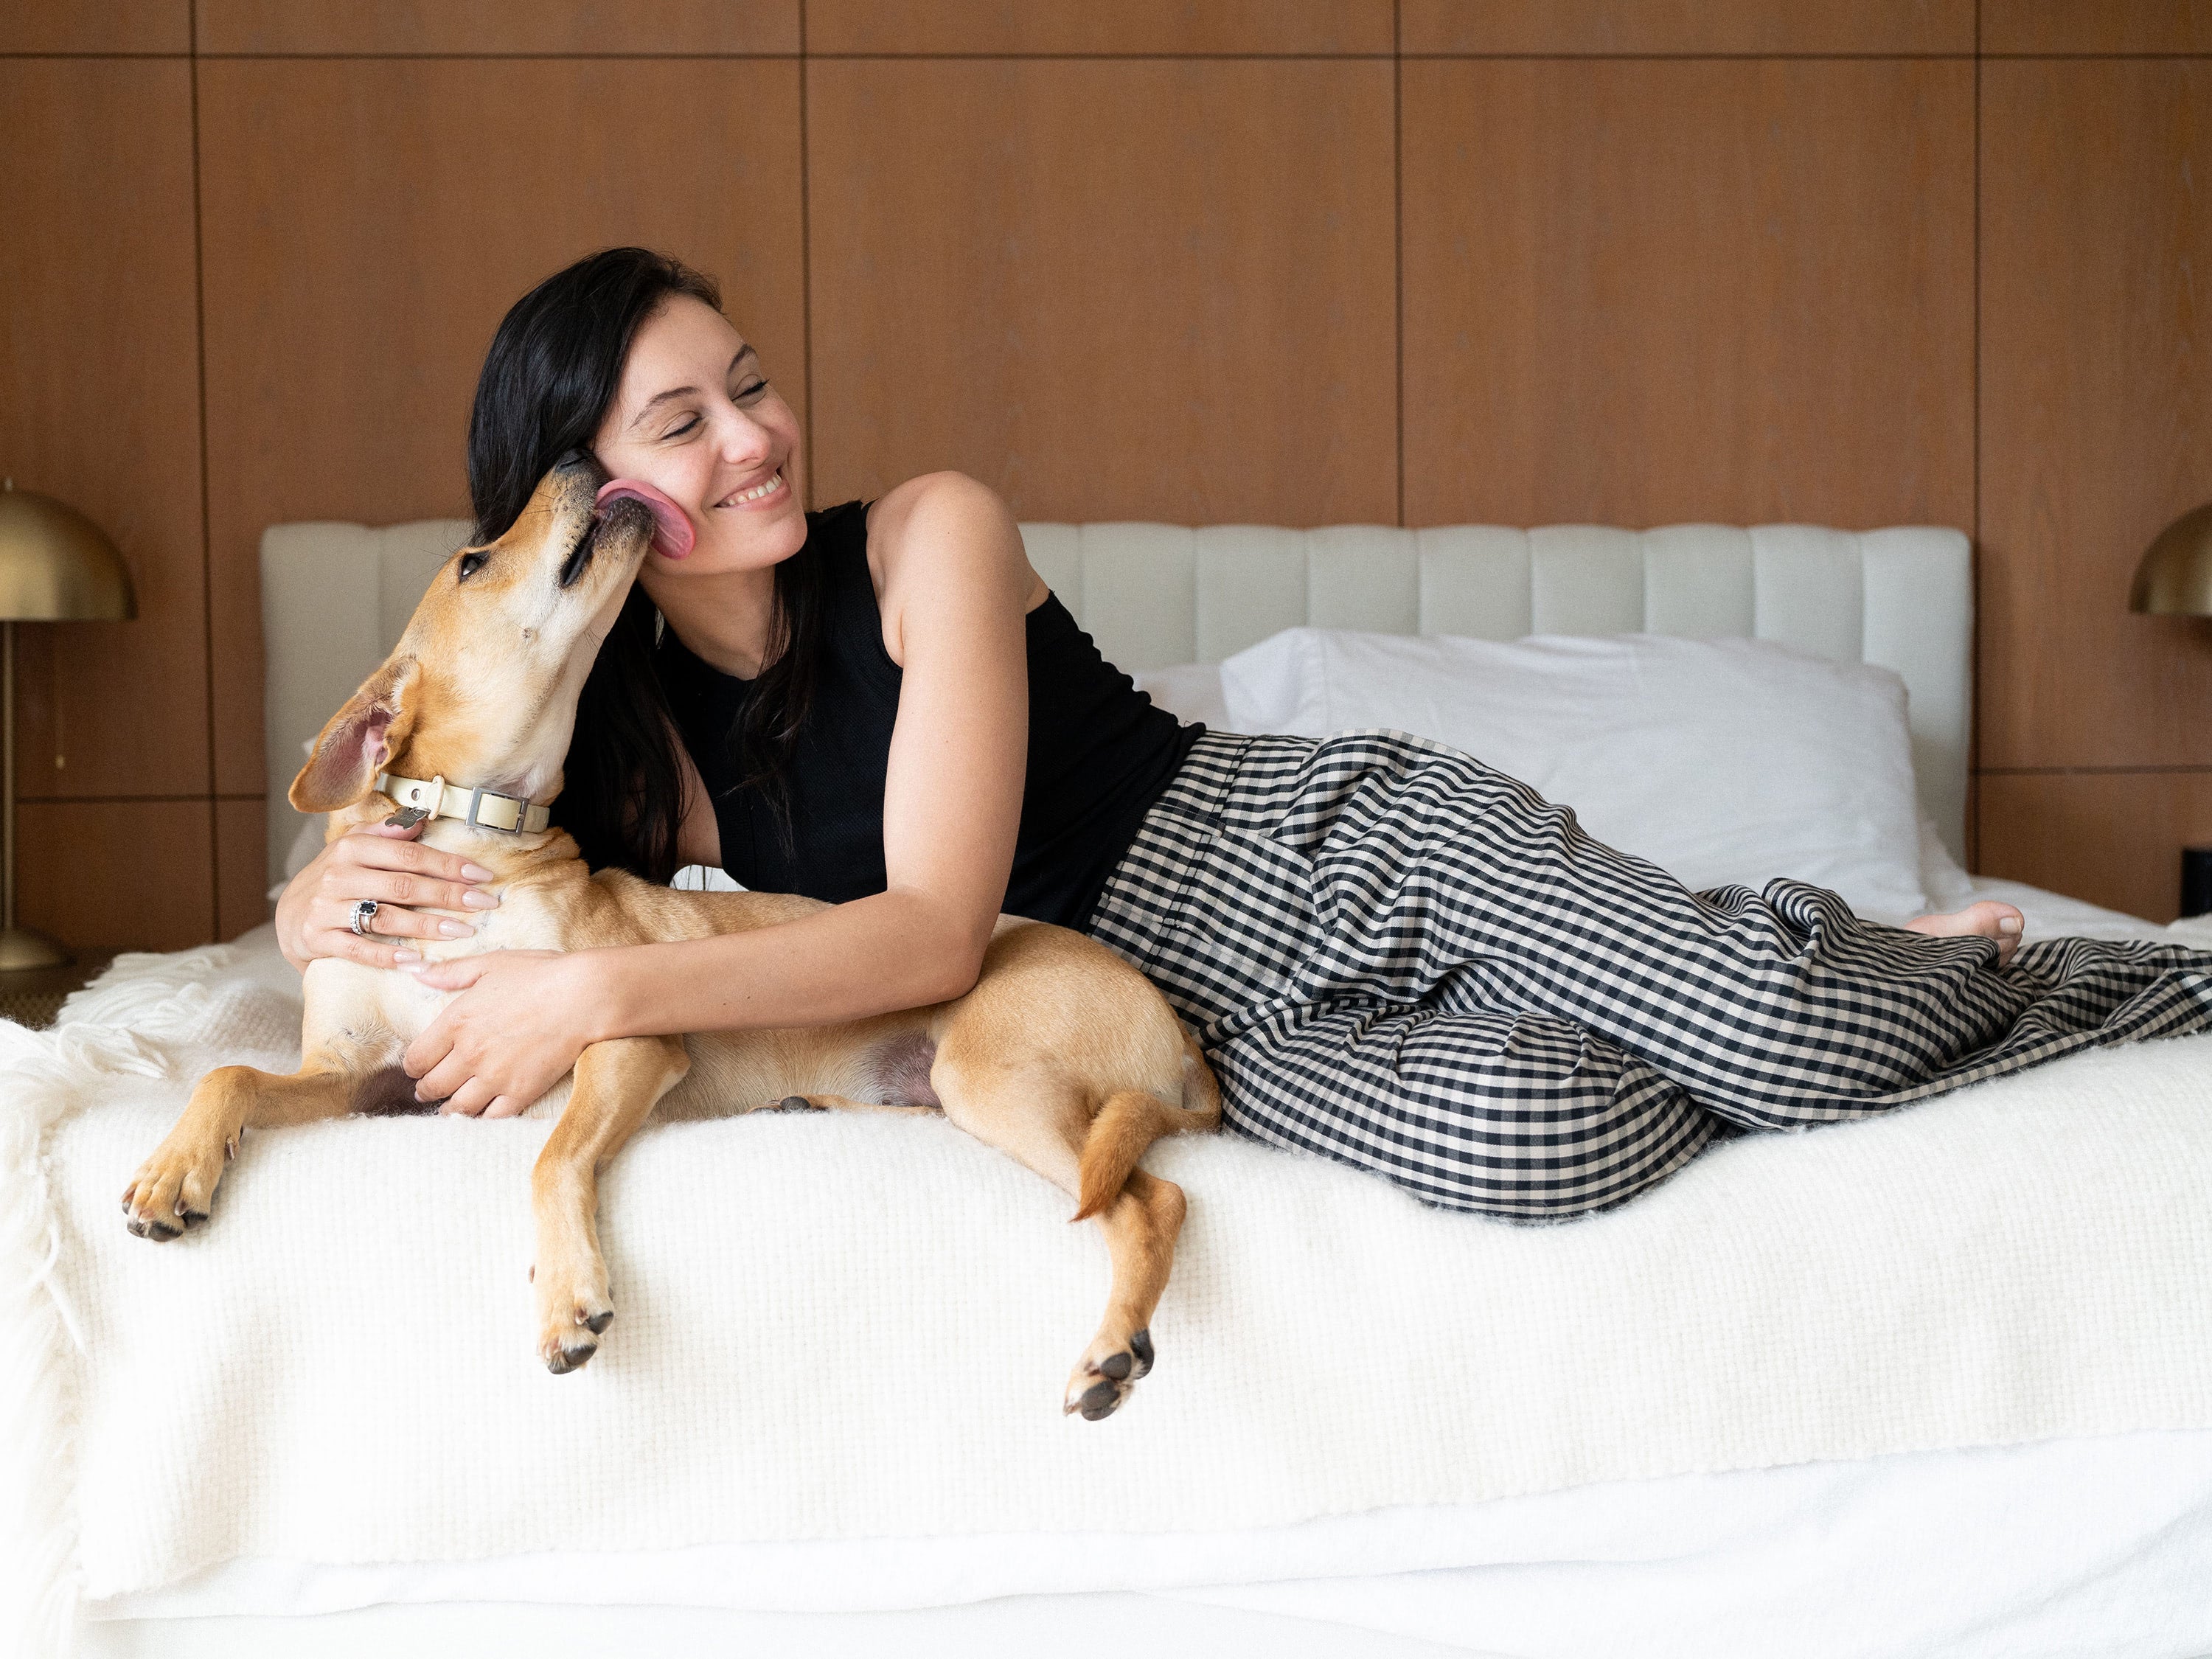 Marta Pozzan, model and actress, laying on her bed with her dog